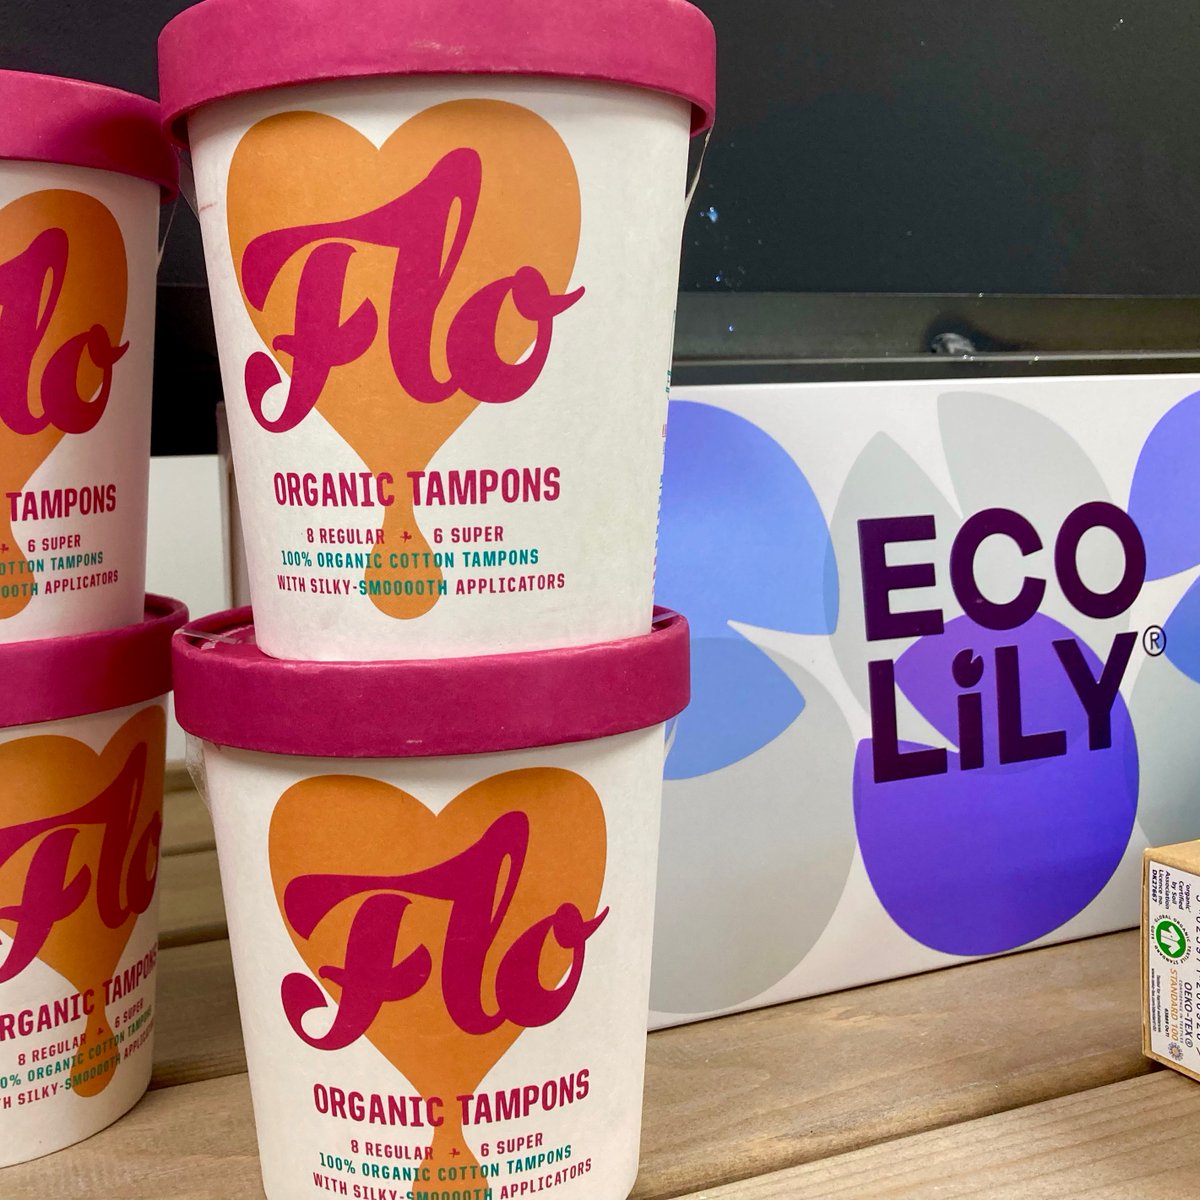 We're really pleased to be able to offer free eco-friendly and reusable period products thanks to support from @cardiffcouncil. If you live in #StMellons and need help with period products come along to St Mellons Pantry on Tuesday (9am to 5pm).